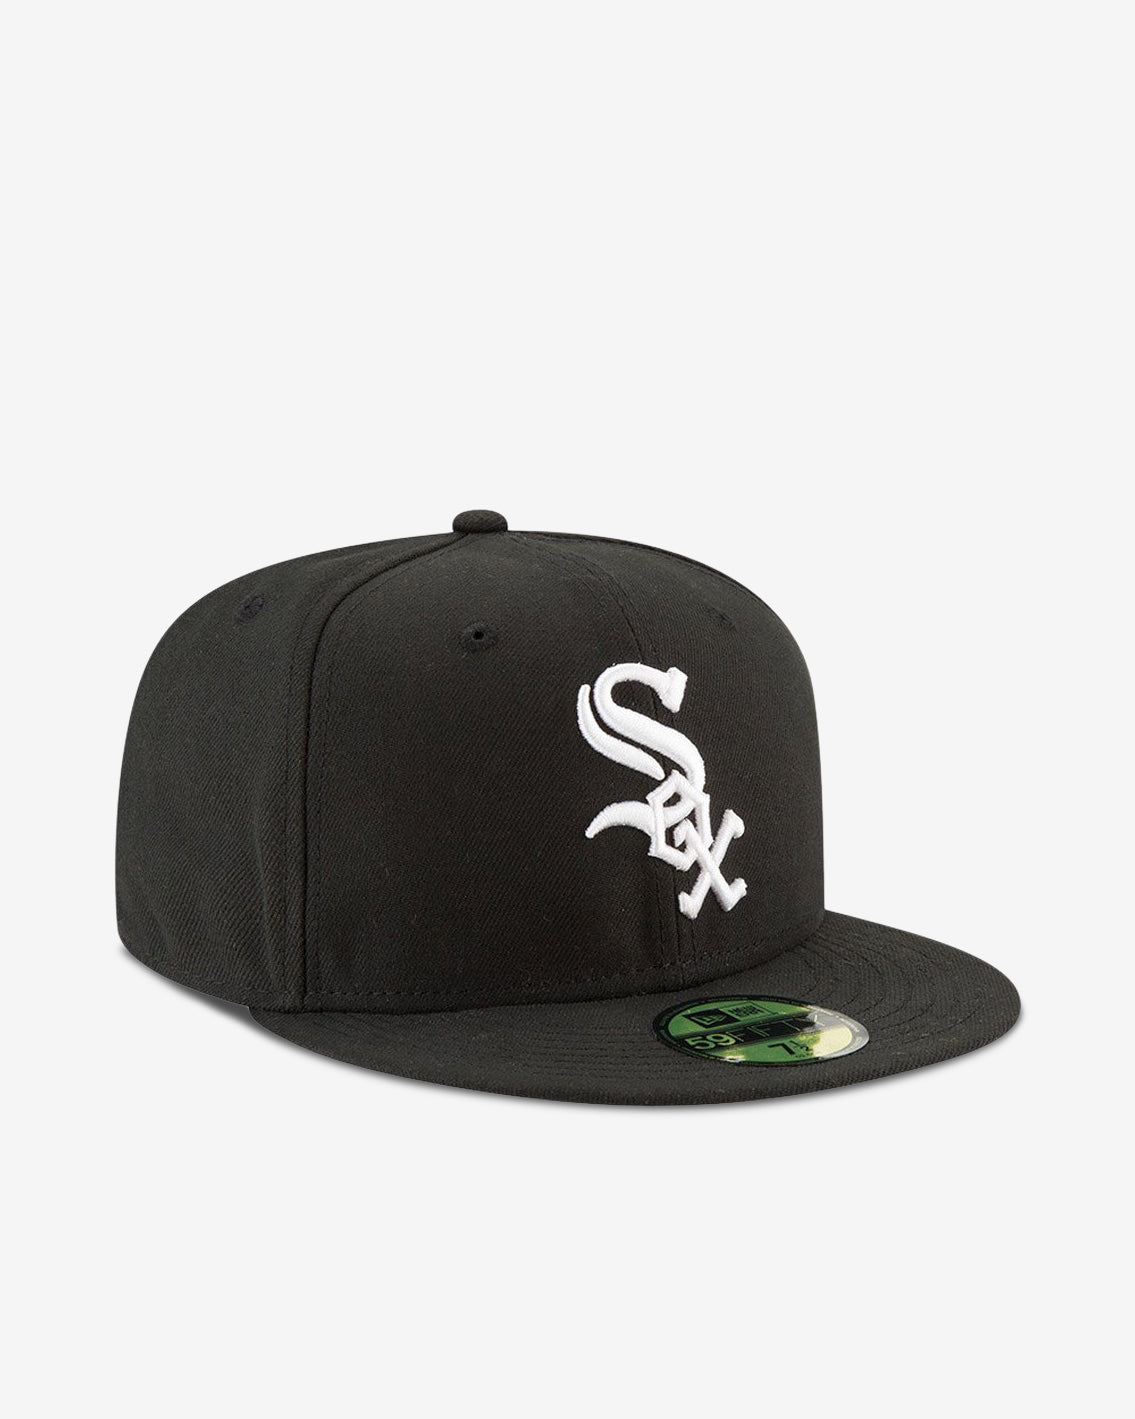 CHICAGO WHITE SOX ACPERF 59FIFTY - BLACK